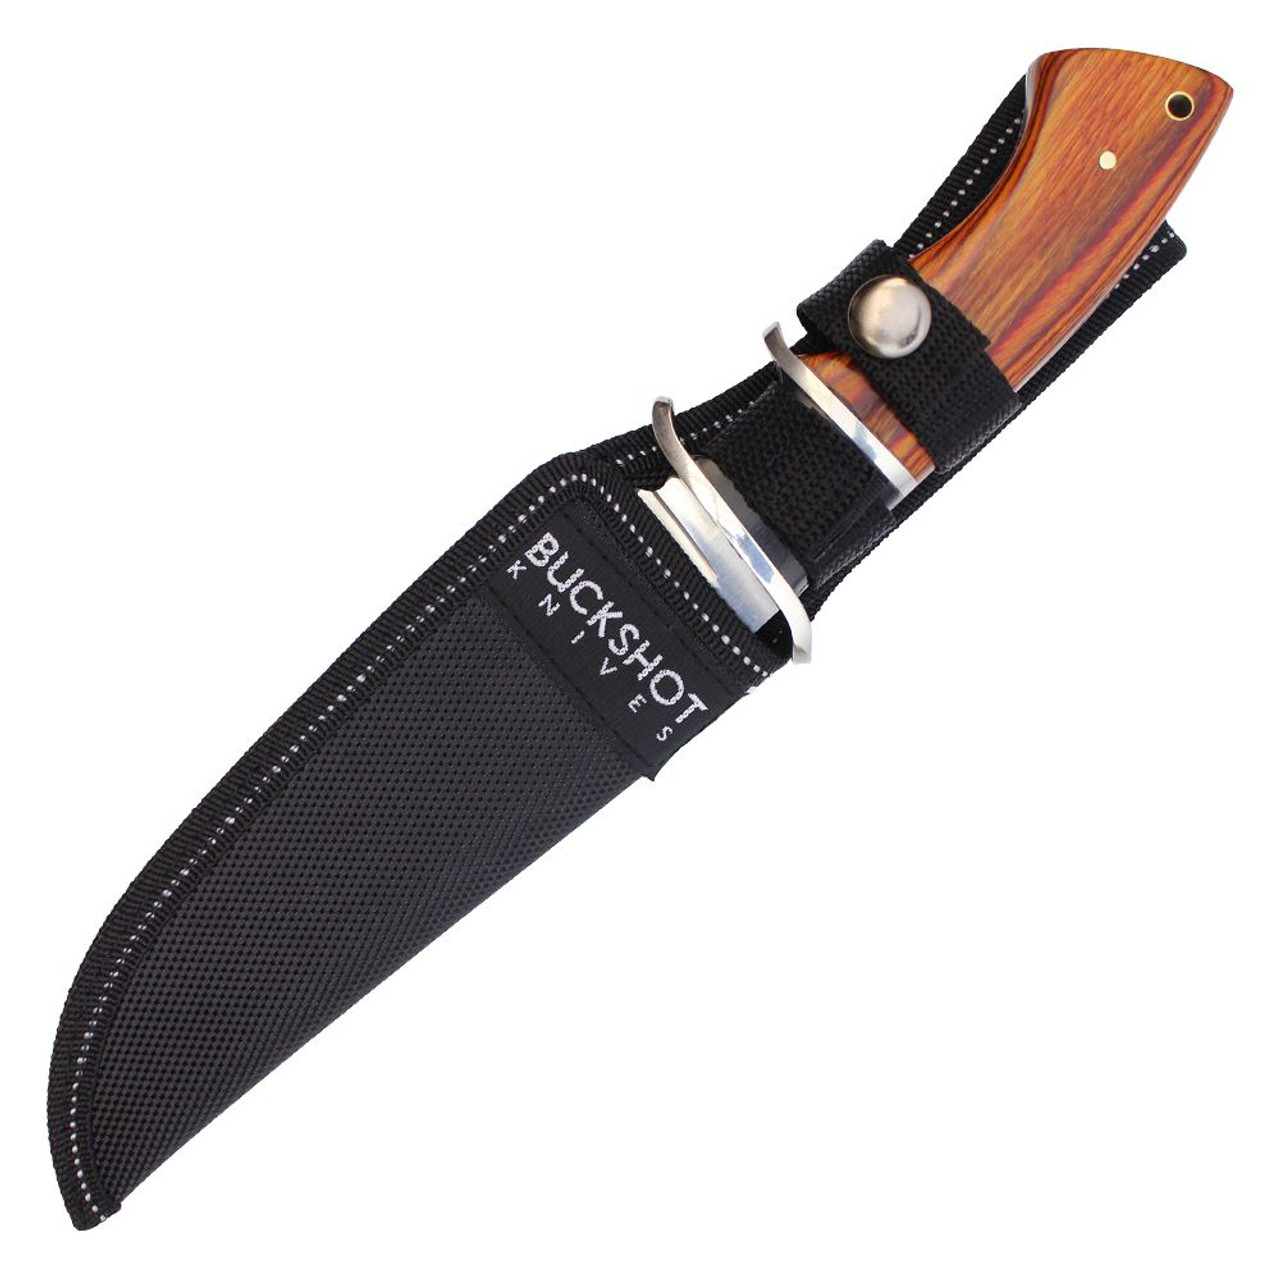 12" Overall Wooden Handle Boyd Fixed Blade Hunting Knife - HBS38